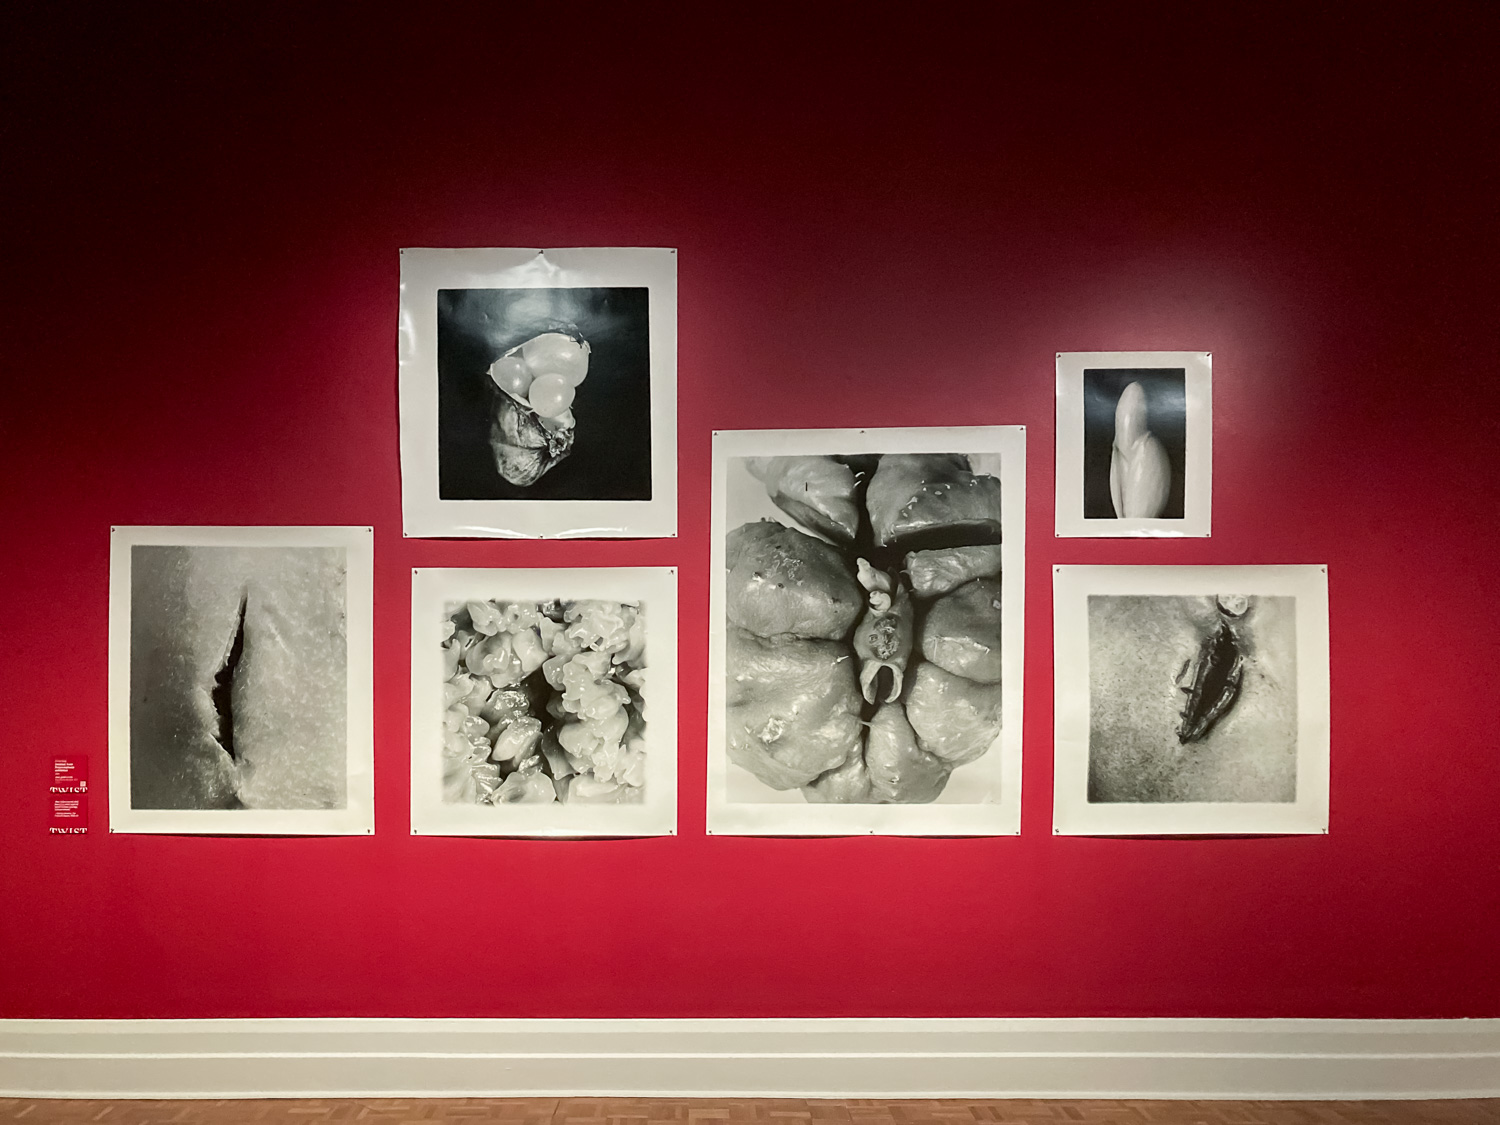 A series of six black and white images on a red wall